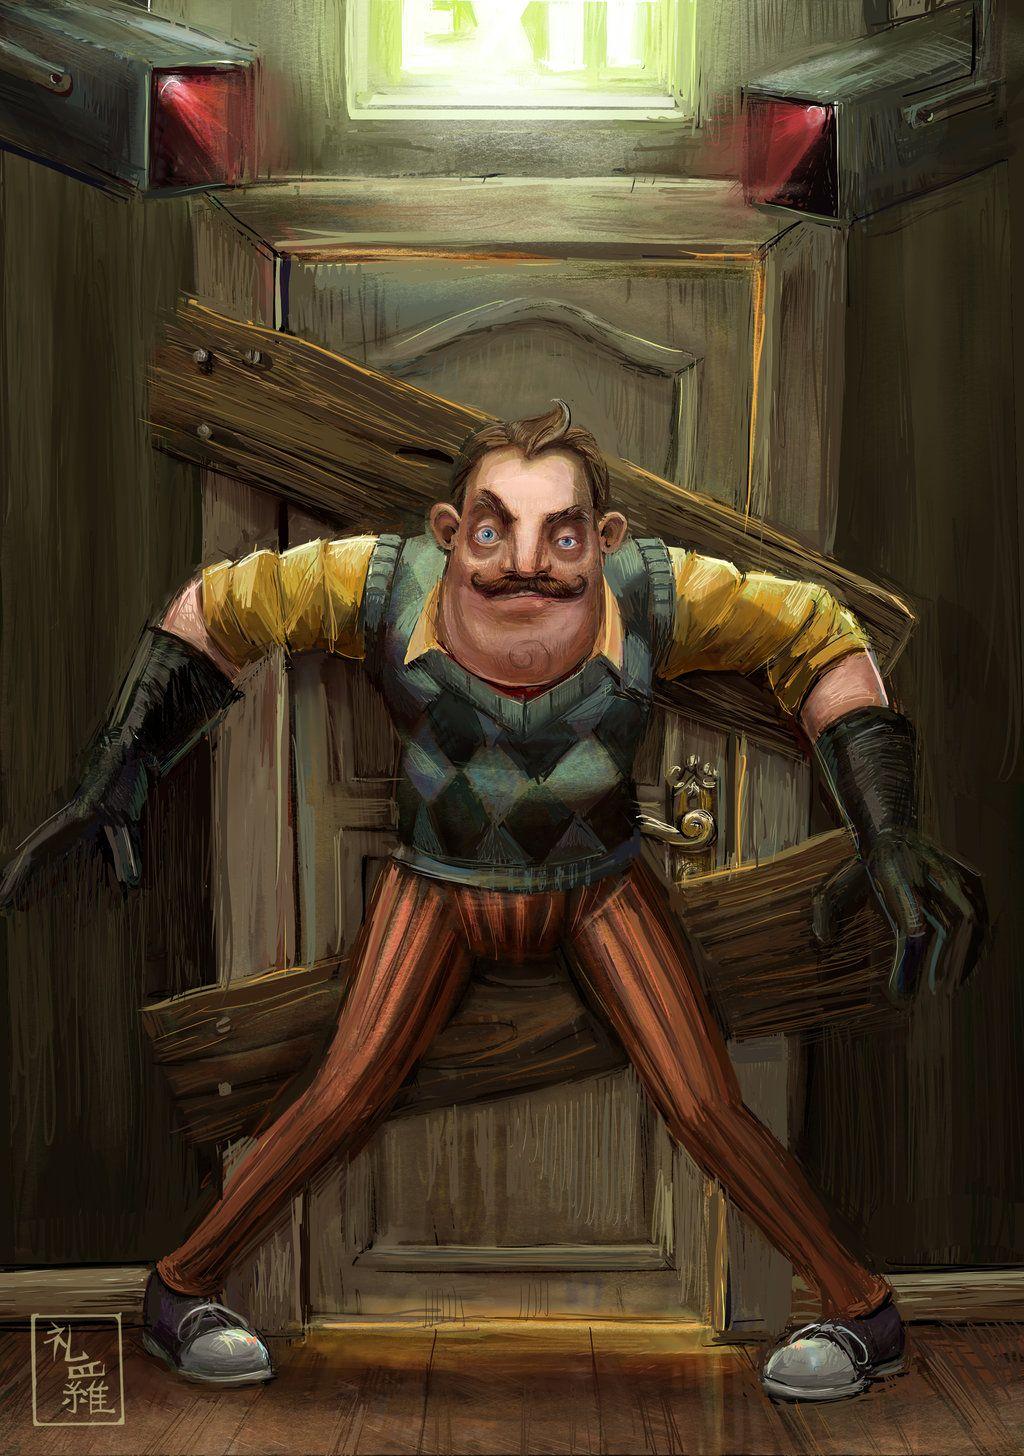 what is in the basement in hello neighbor